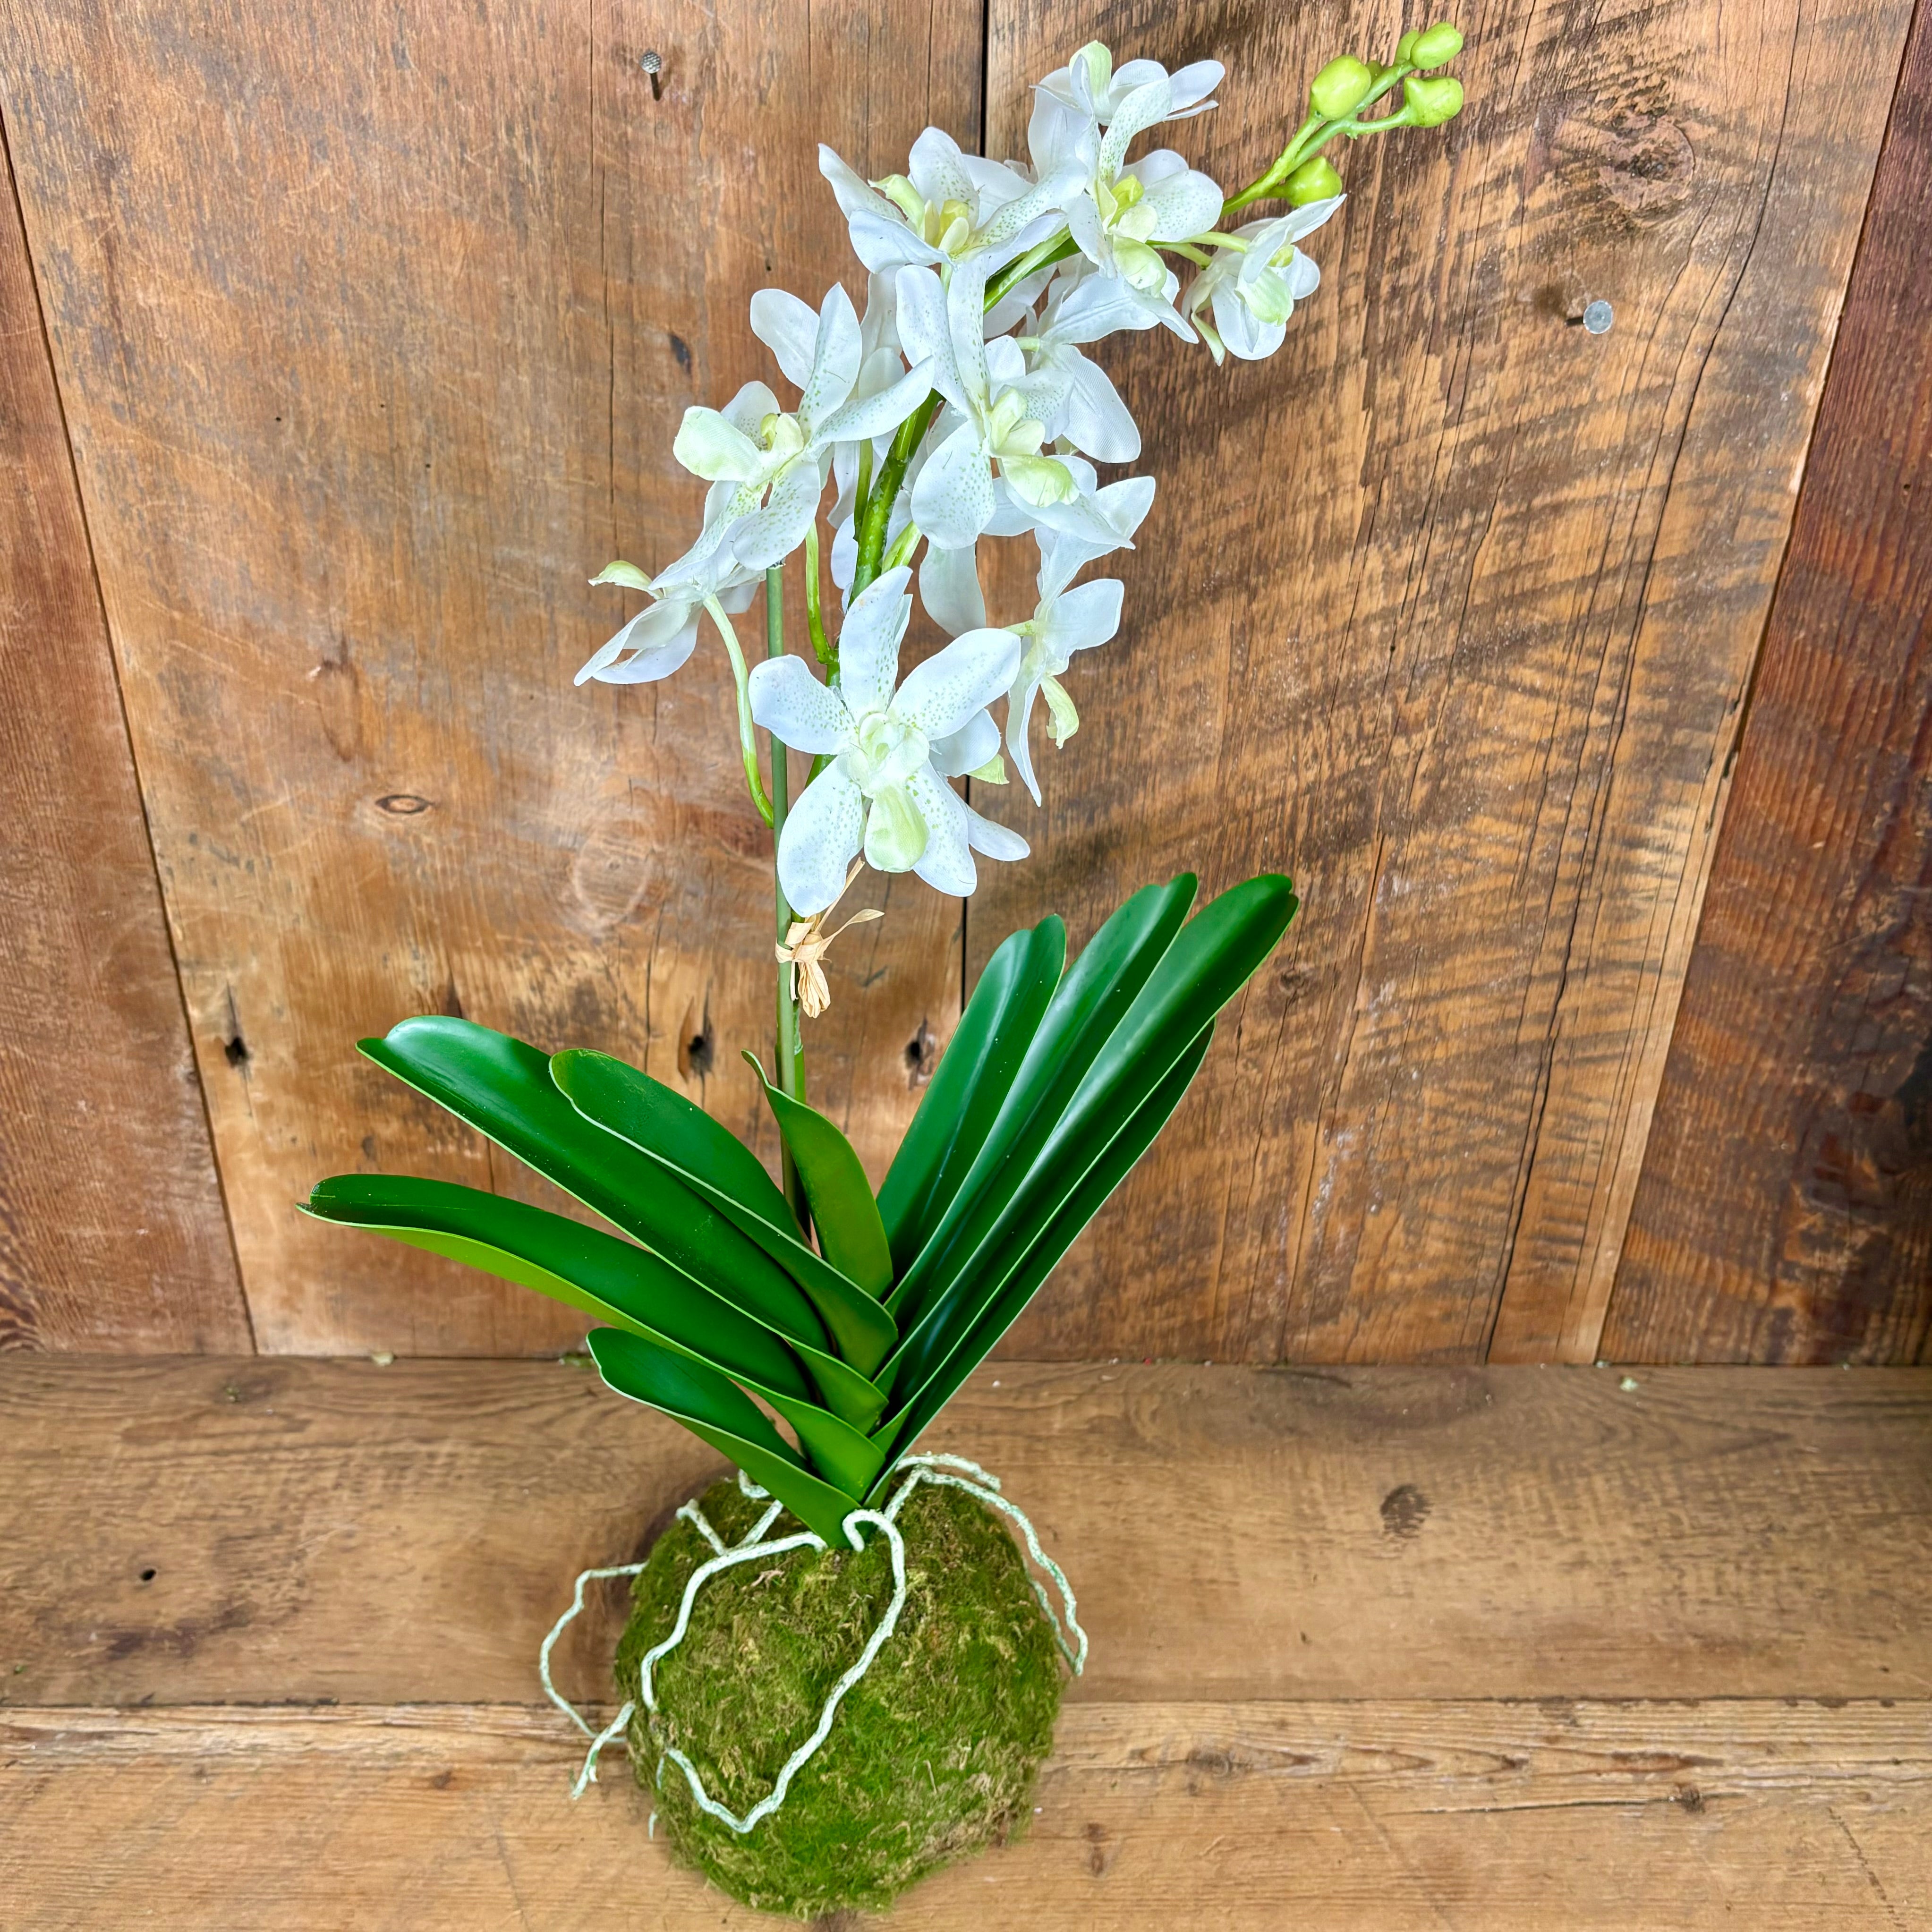 24.5" Real Touch White Vanda Orchid with Moss Ball